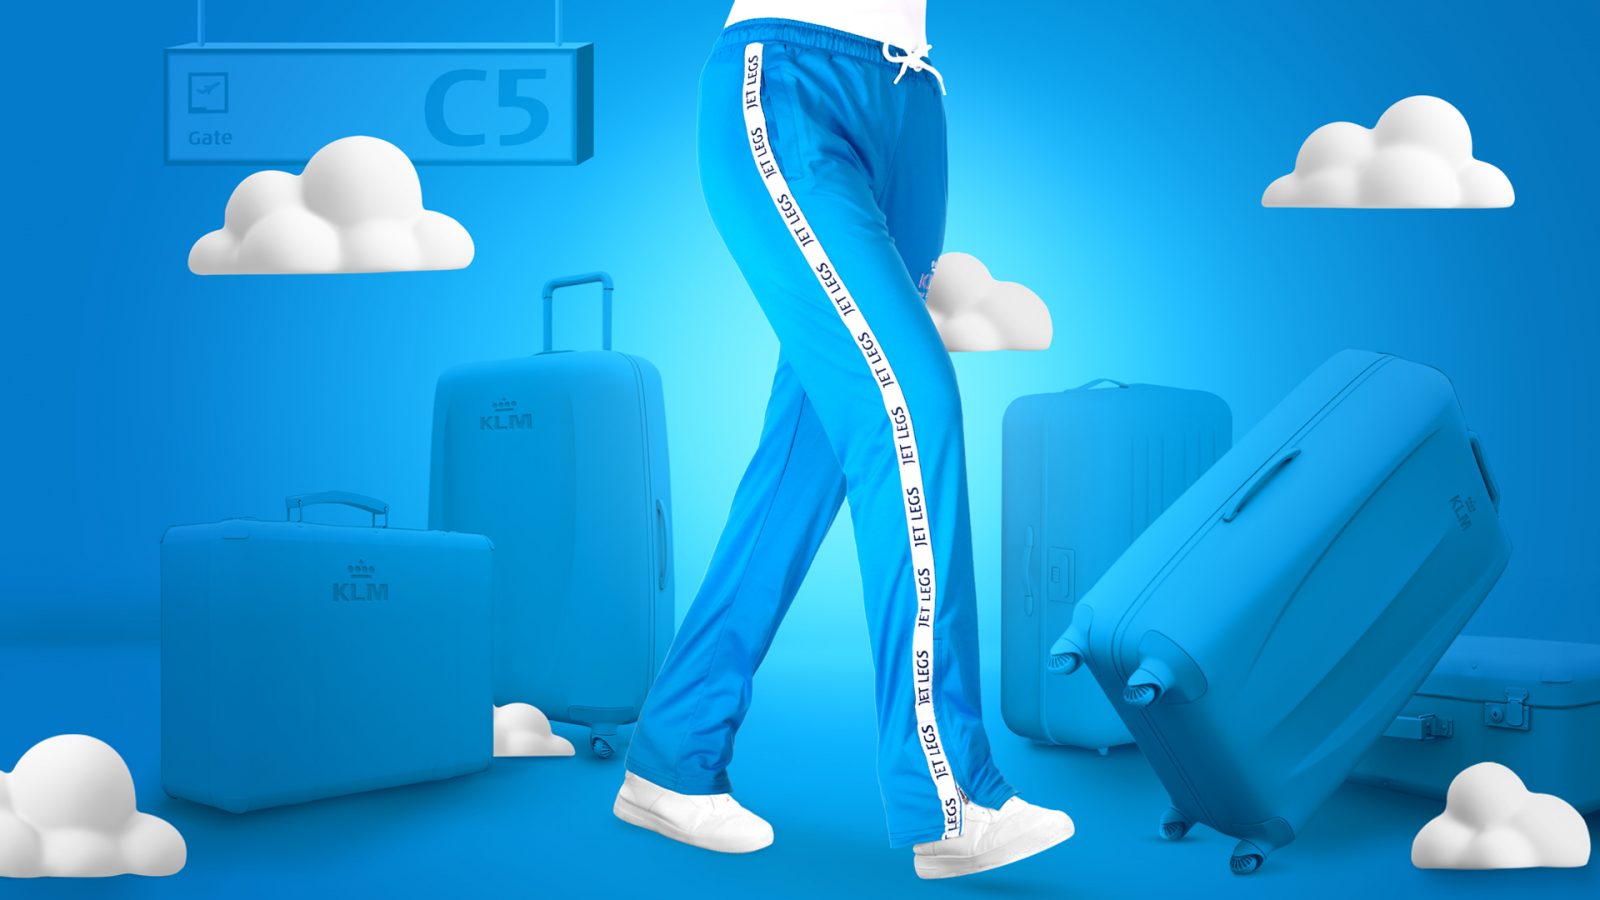 High-Fashion Comfort Wear at 35,000 Feet: Dutch Airline KLM is Launching its Own Fashion Label